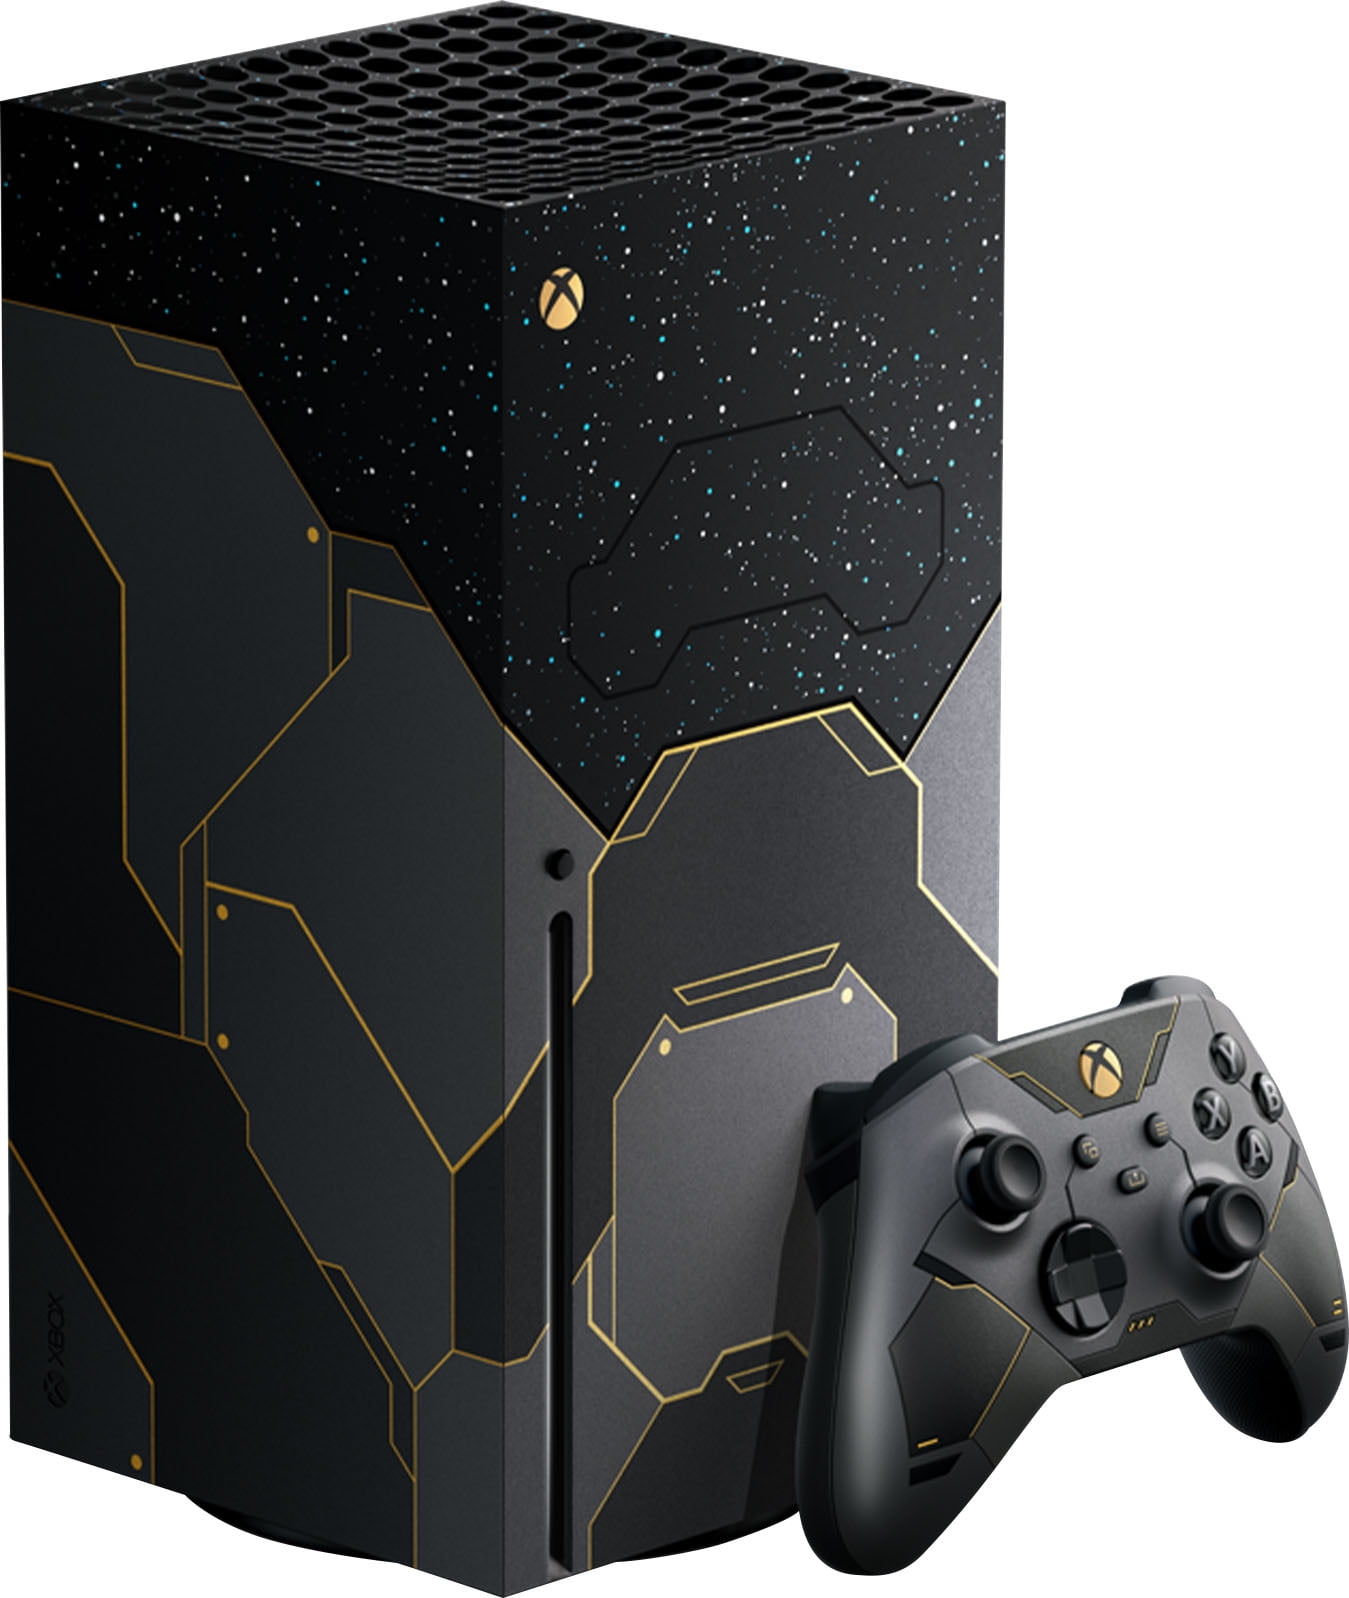 Xbox Series X Halo Infinite Limited Edition and LE Elite Series 2  controller arrive Nov. 25 - CNET